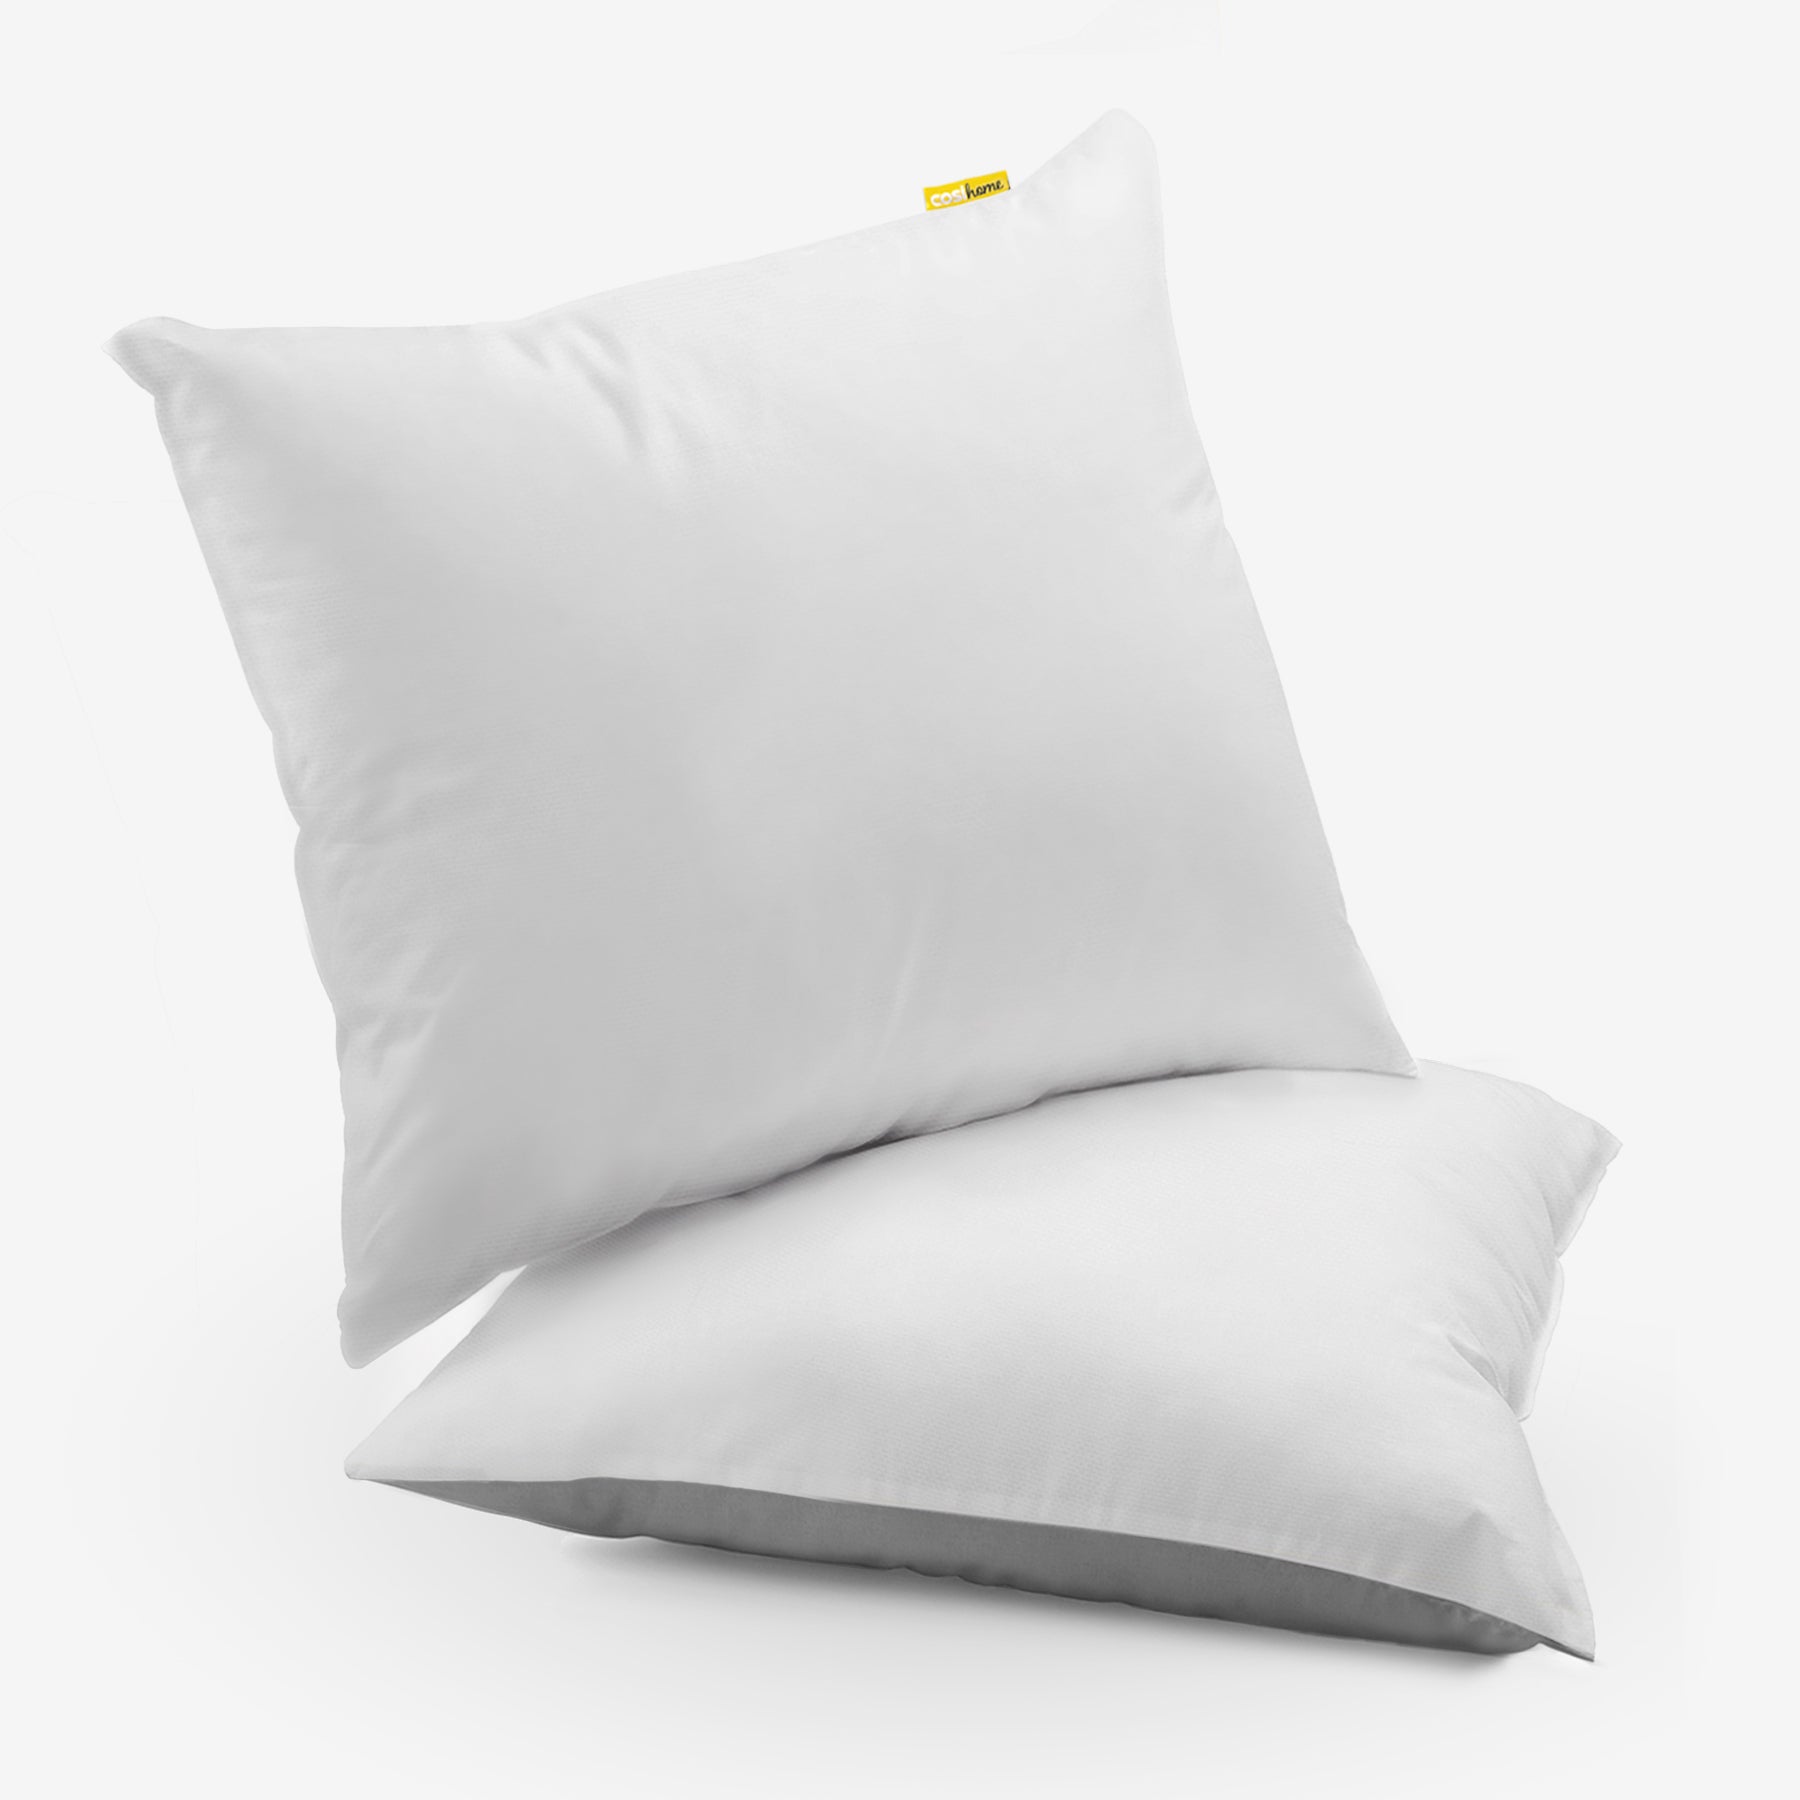 80 x 50 cm Grey Cooling Pillow Case - 2 Pack